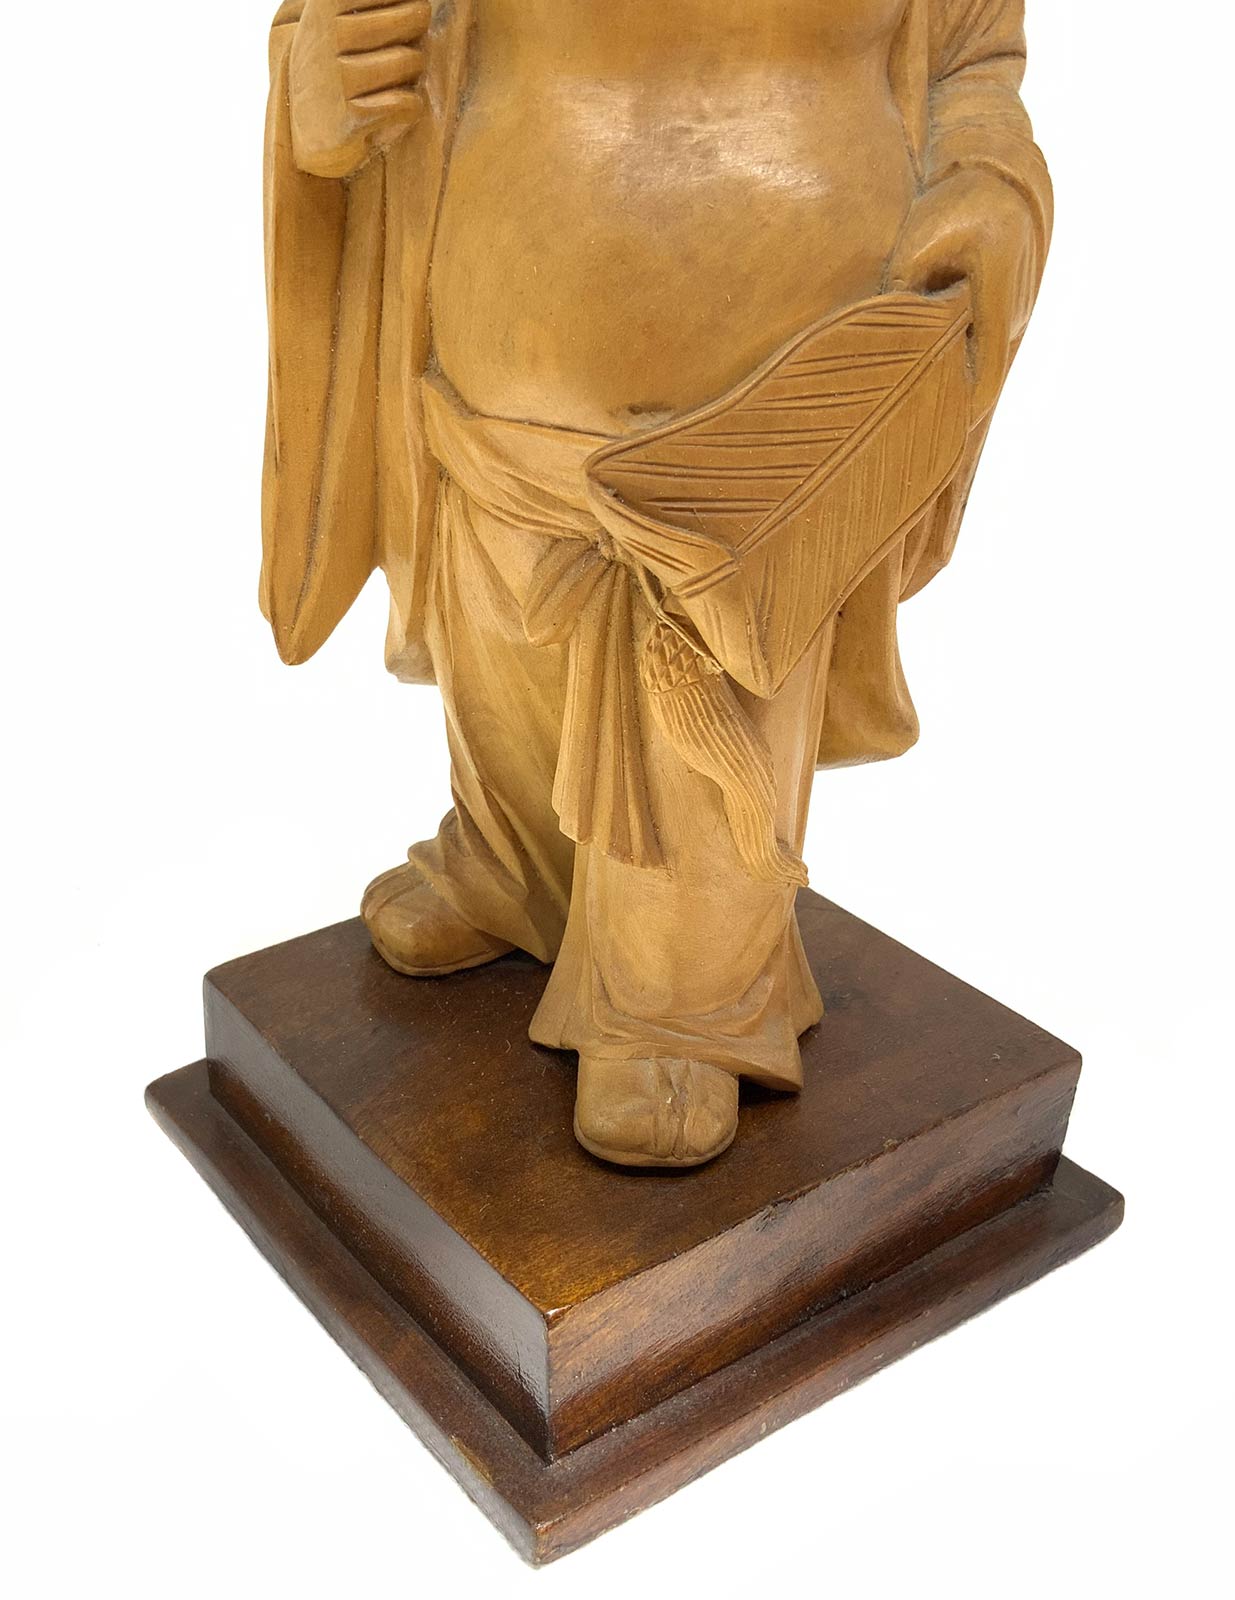 Wooden sculpture of a Chinese wiseman, China, eighteenth century. H 17 cm, 2.4 cm with pedestal. - Image 5 of 5